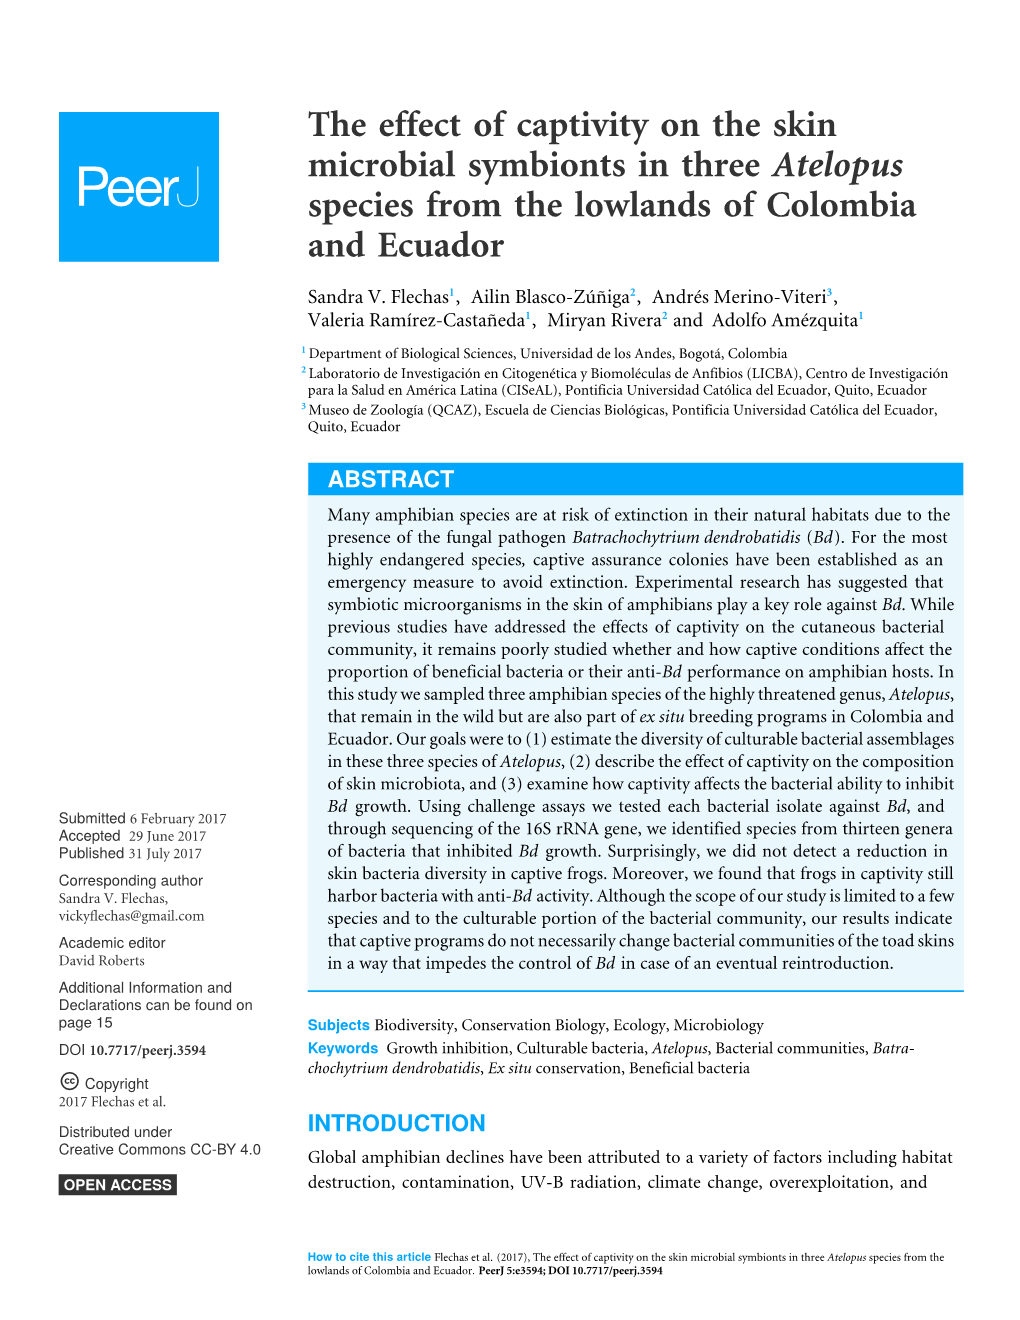 The Effect of Captivity on the Skin Microbial Symbionts in Three Atelopus Species from the Lowlands of Colombia and Ecuador